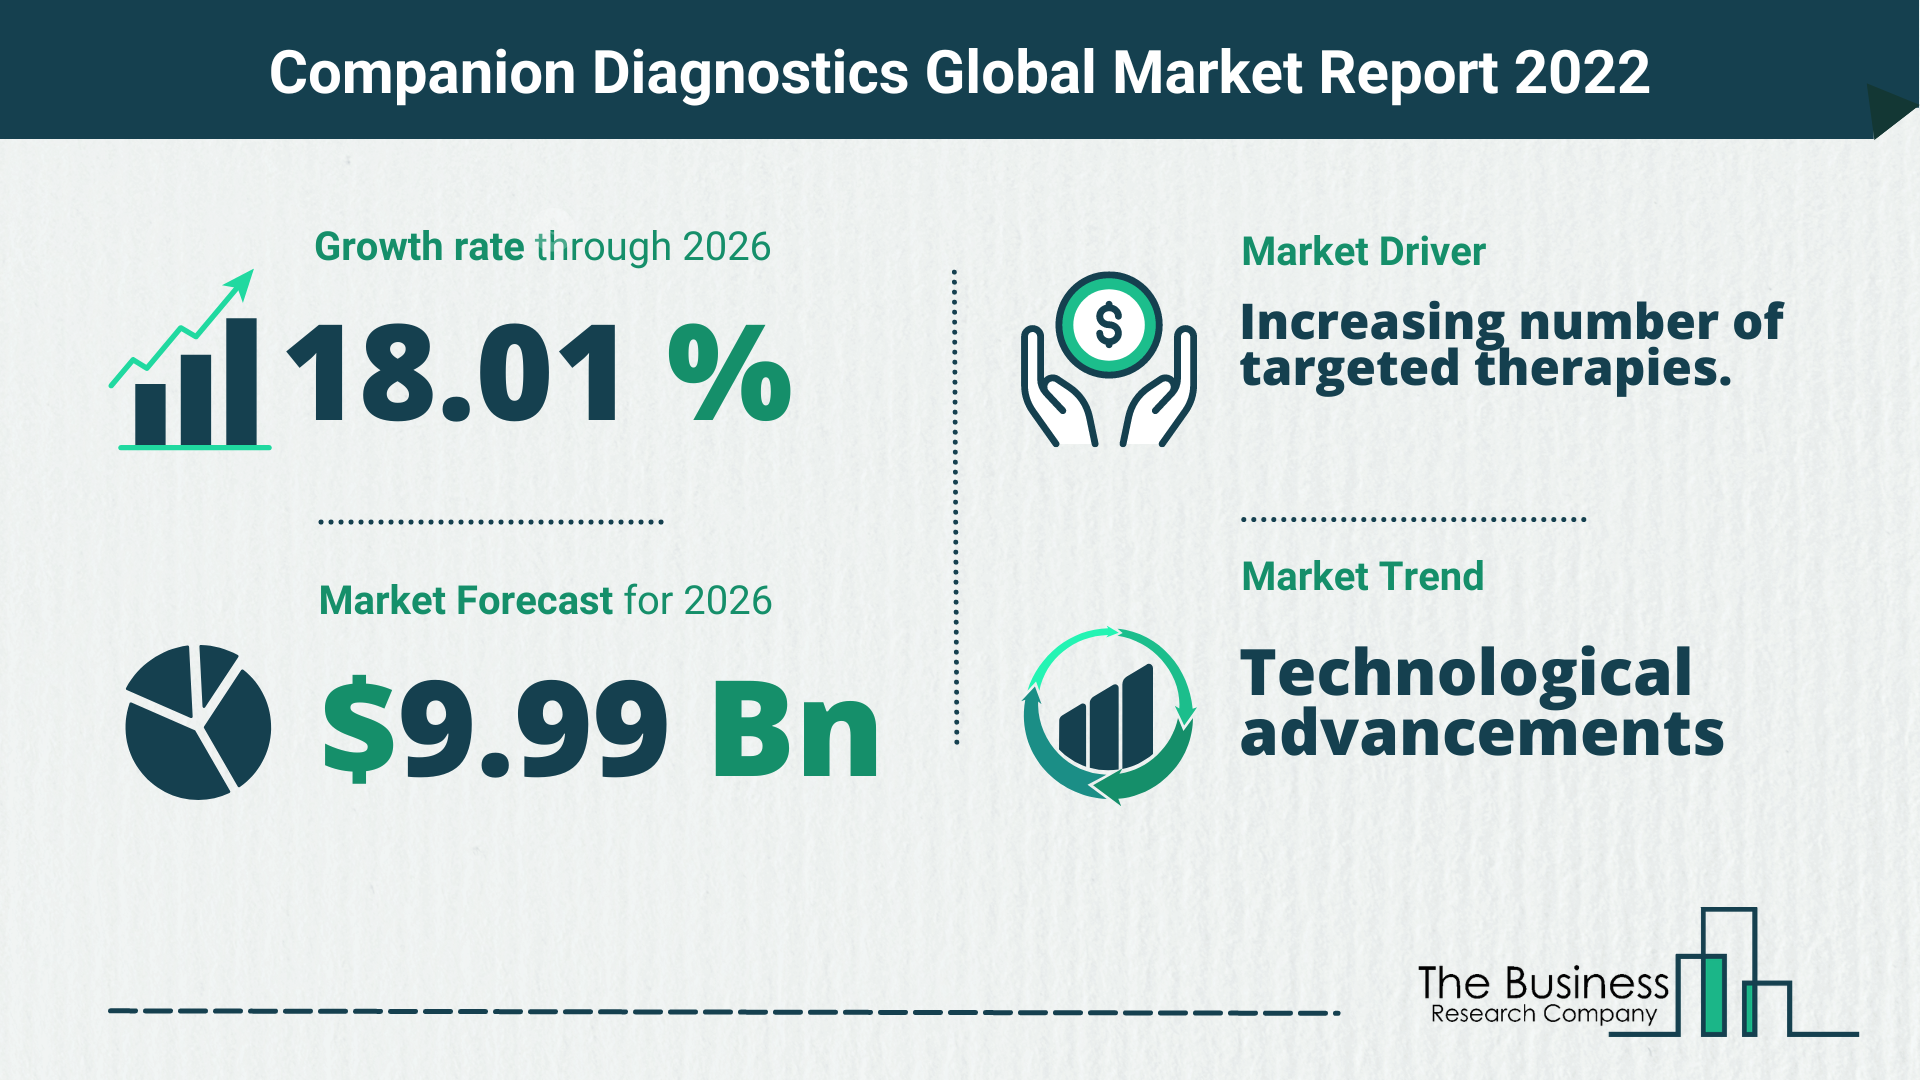 How Will The Companion Diagnostics Market Grow In 2022?